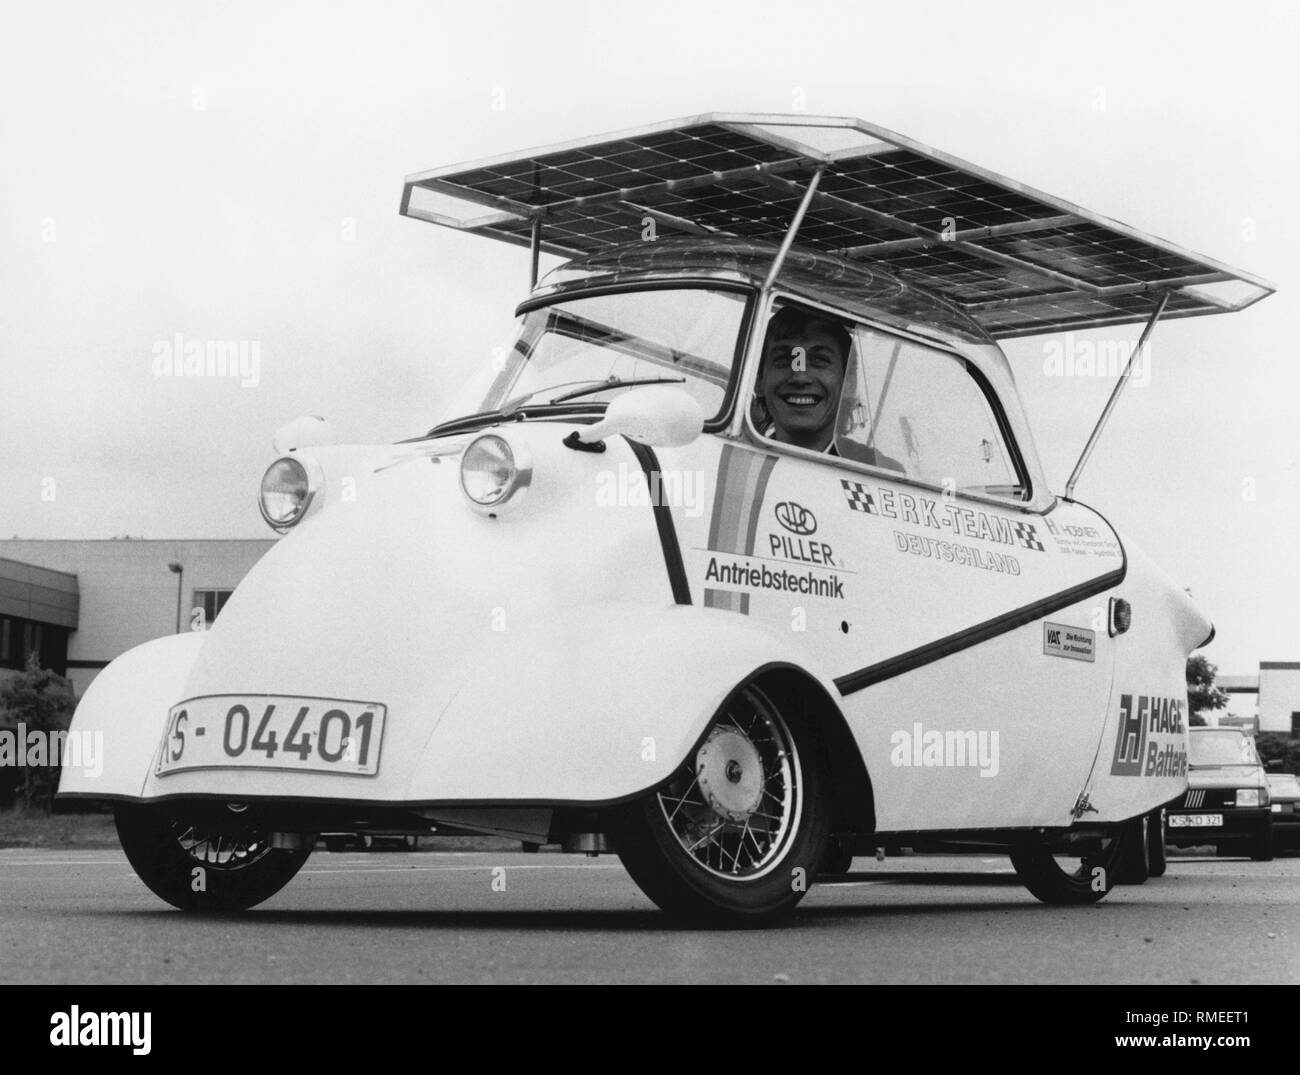 Hans-Juergen Erk sits in his Messerschmitt KR200 bubble car, which he has converted to electric powertrain and equipped with a solar system. Erk participated with the bubble car at the Tour de Sol in 1988. Stock Photo